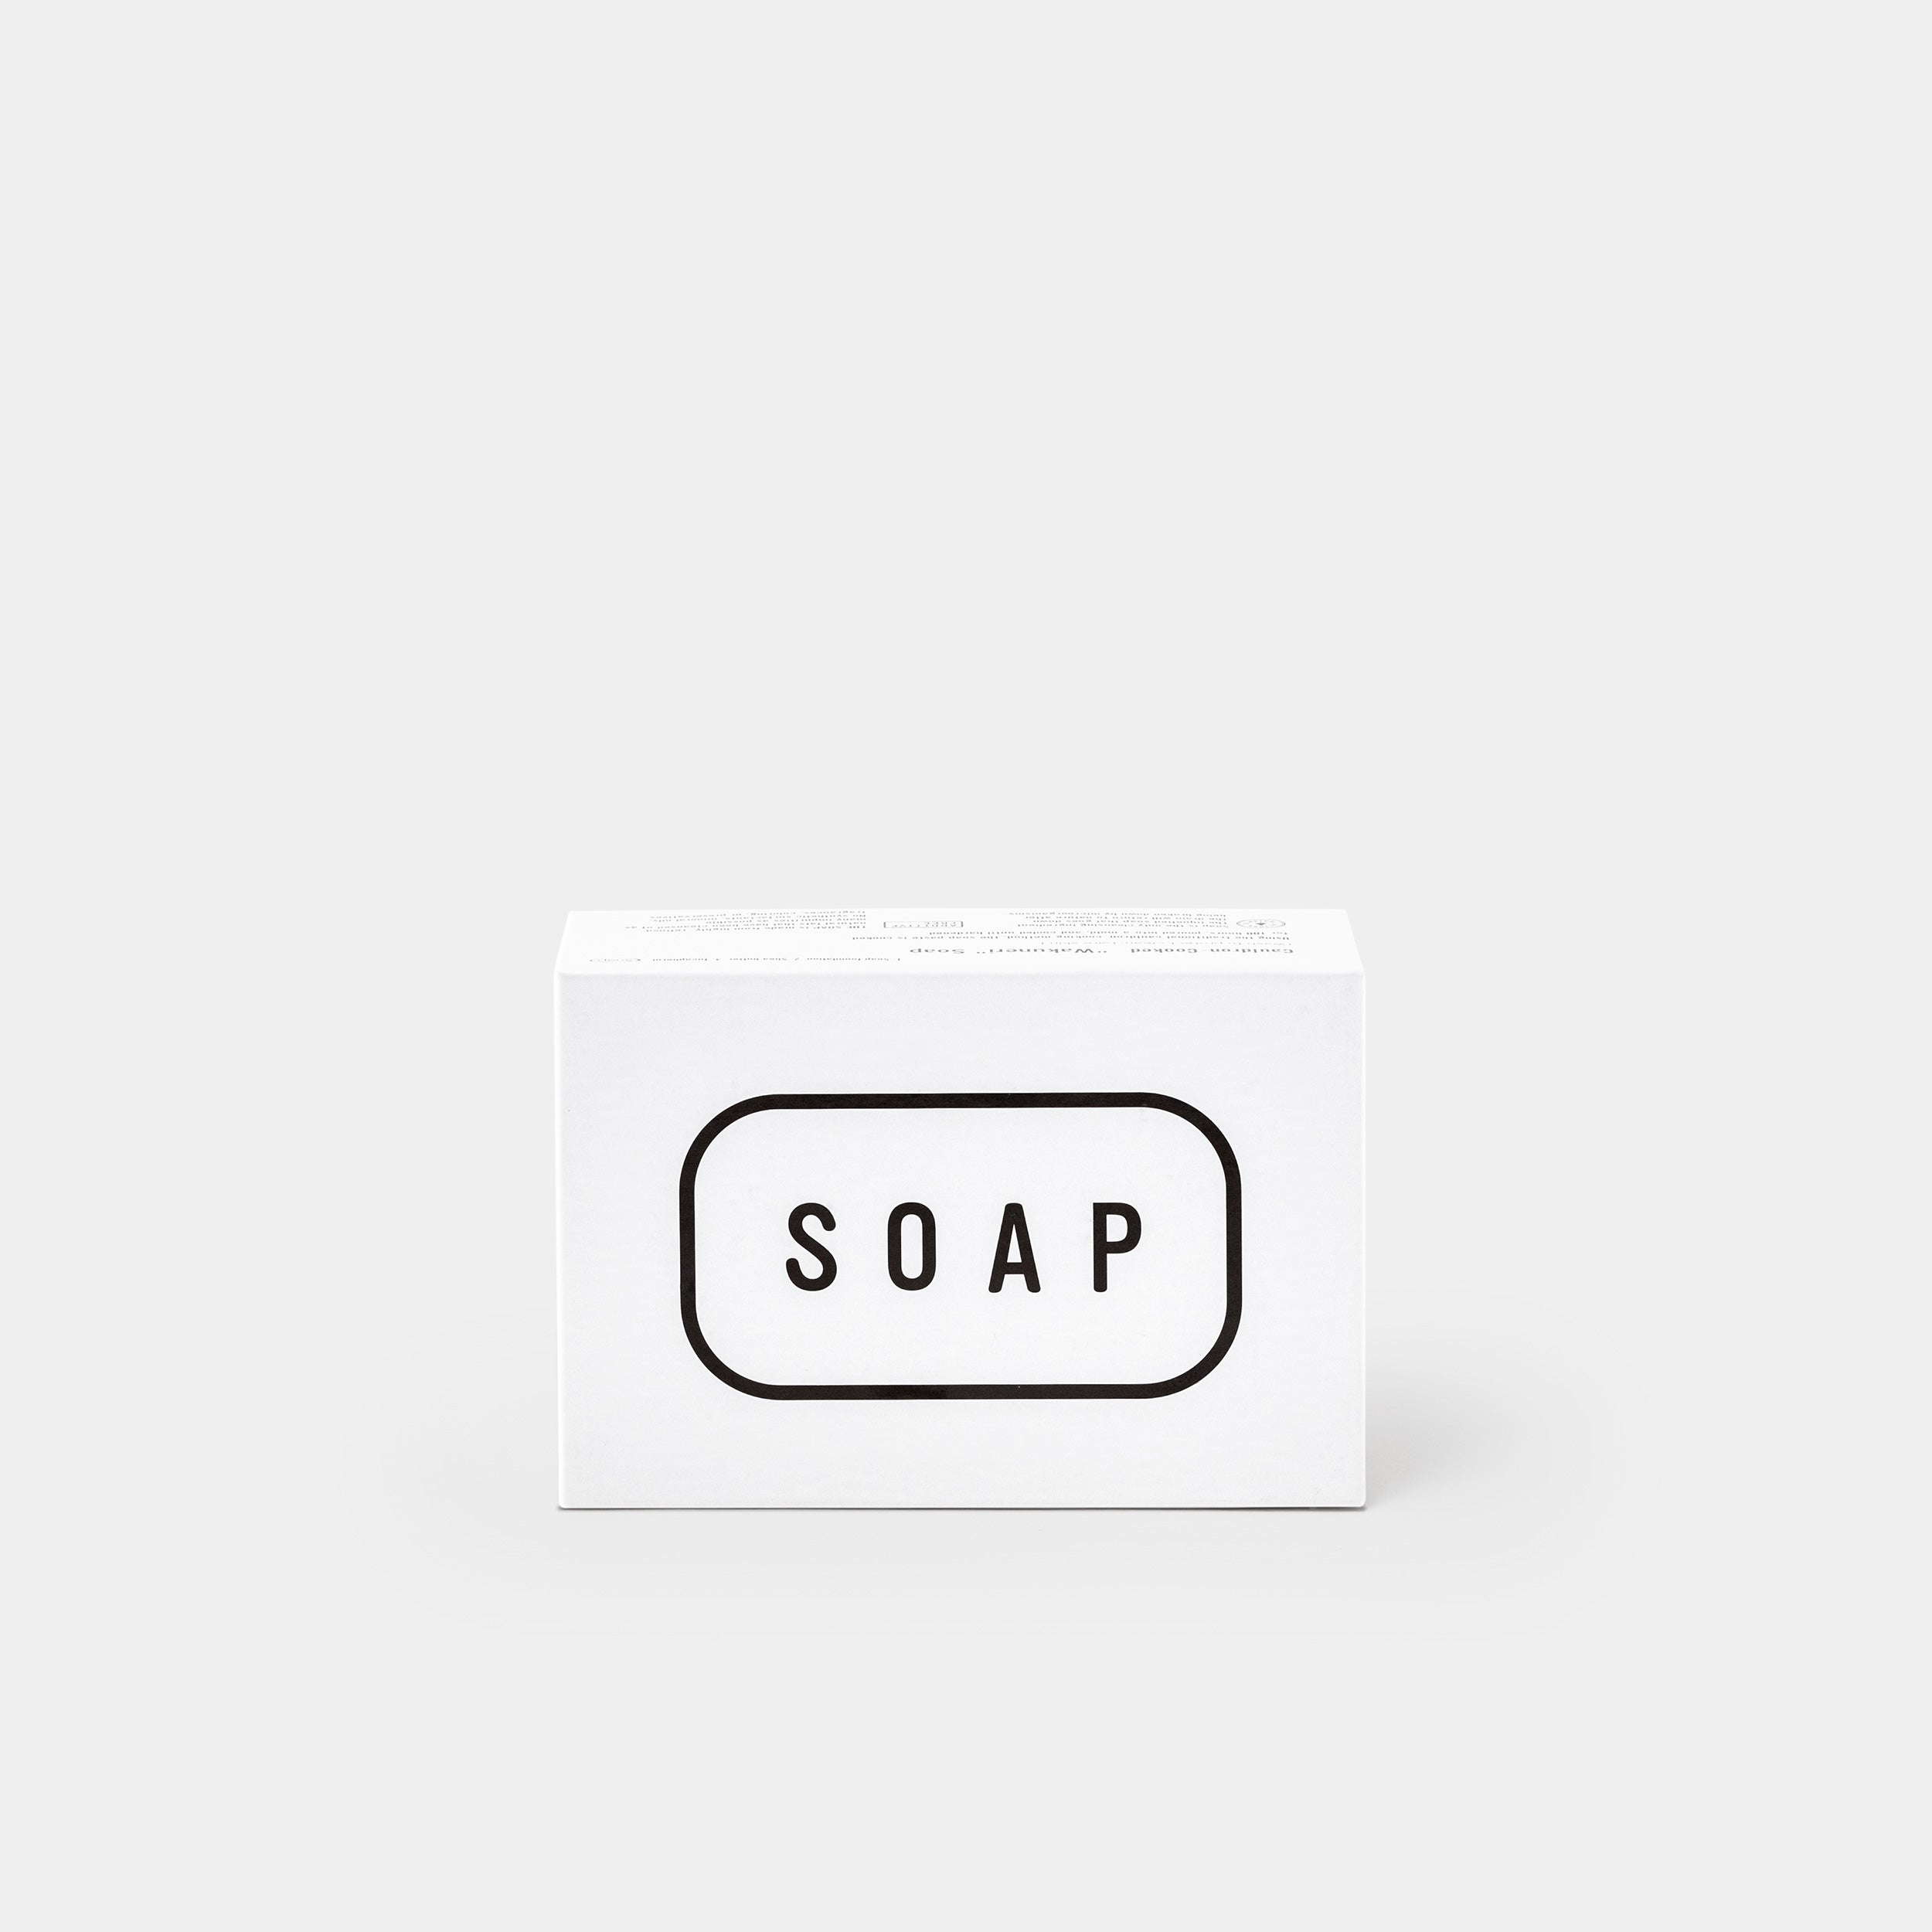 THE Soap with packaging box